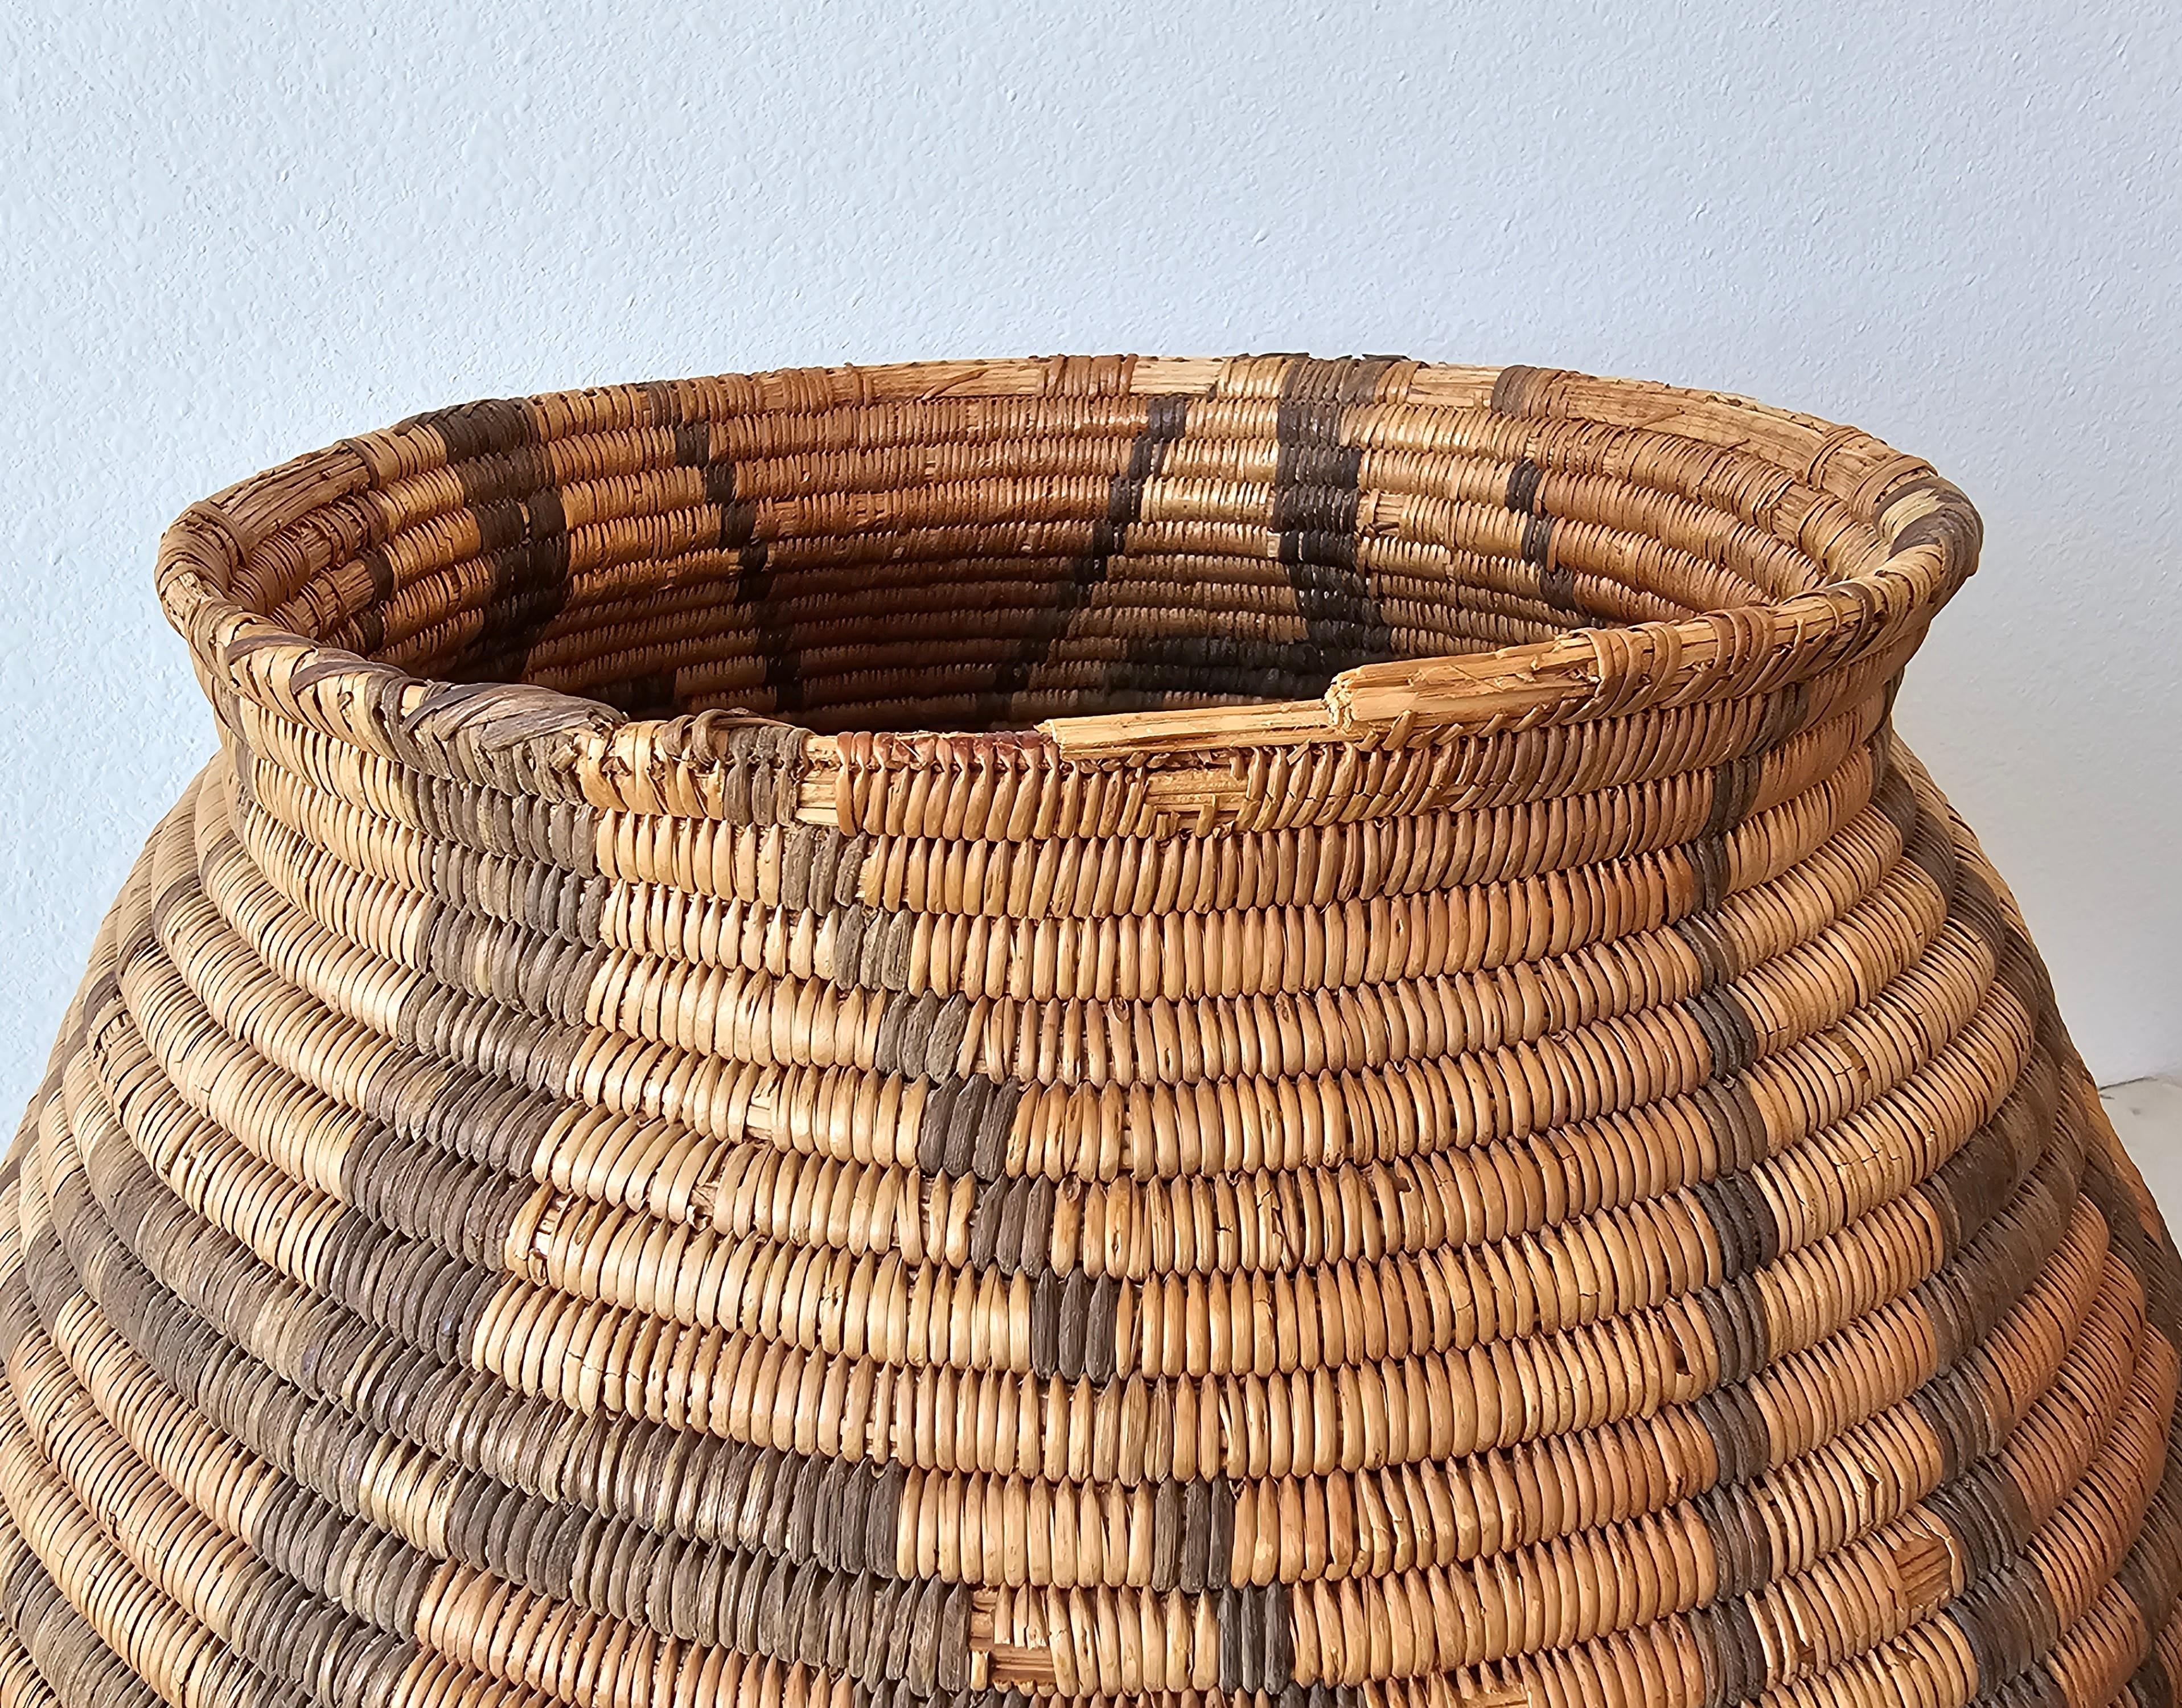 Antique Apache Olla Jar Coiled Willow Wicker Devil's Claw Basket  For Sale 4